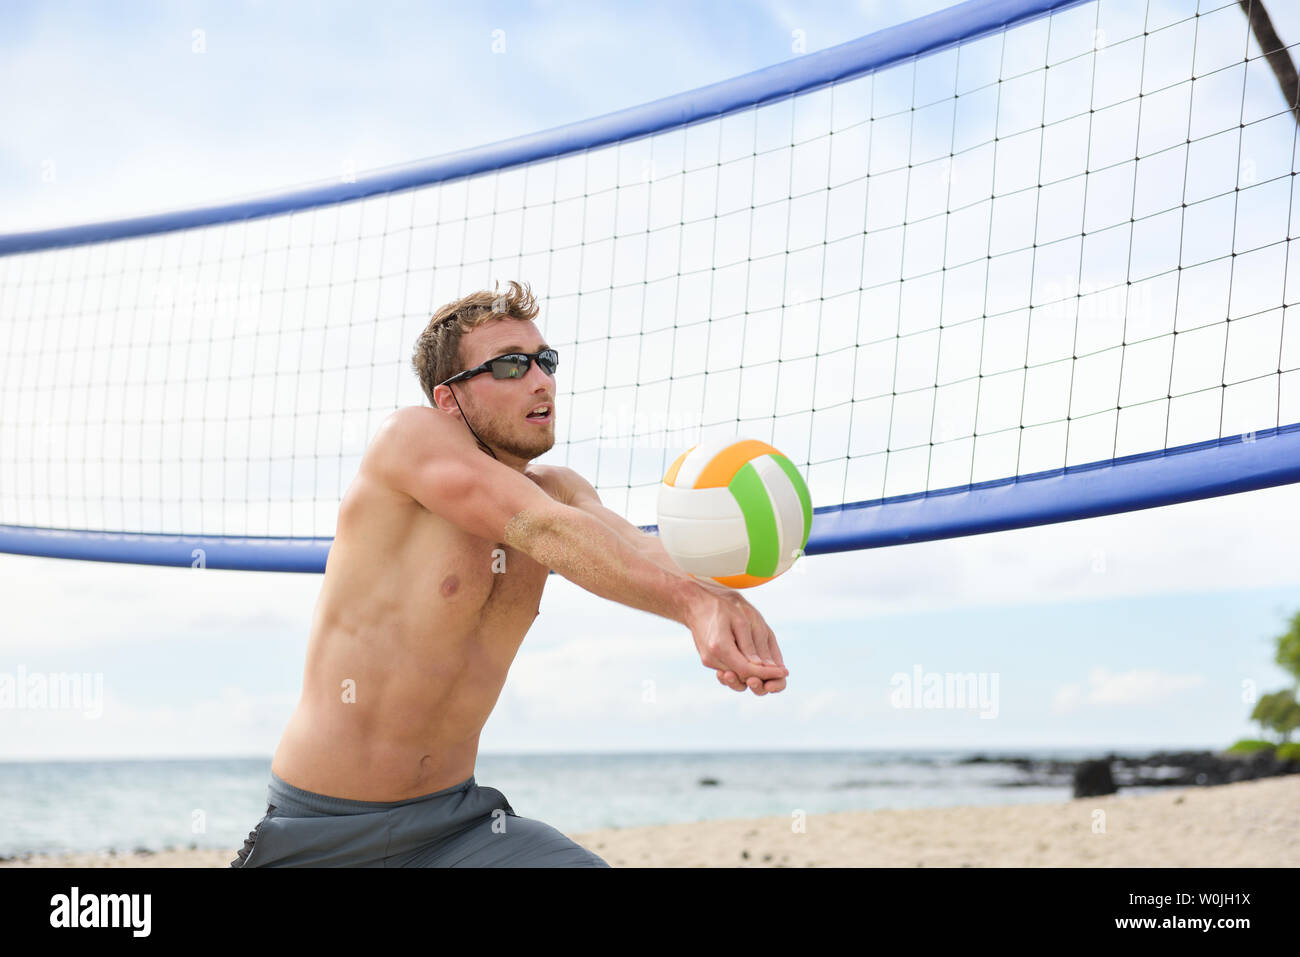 Beach volleyball man playing game hitting forearm pass volley ball during match on summer beach. Male model living healthy active lifestyle doing sport on beach. Stock Photo